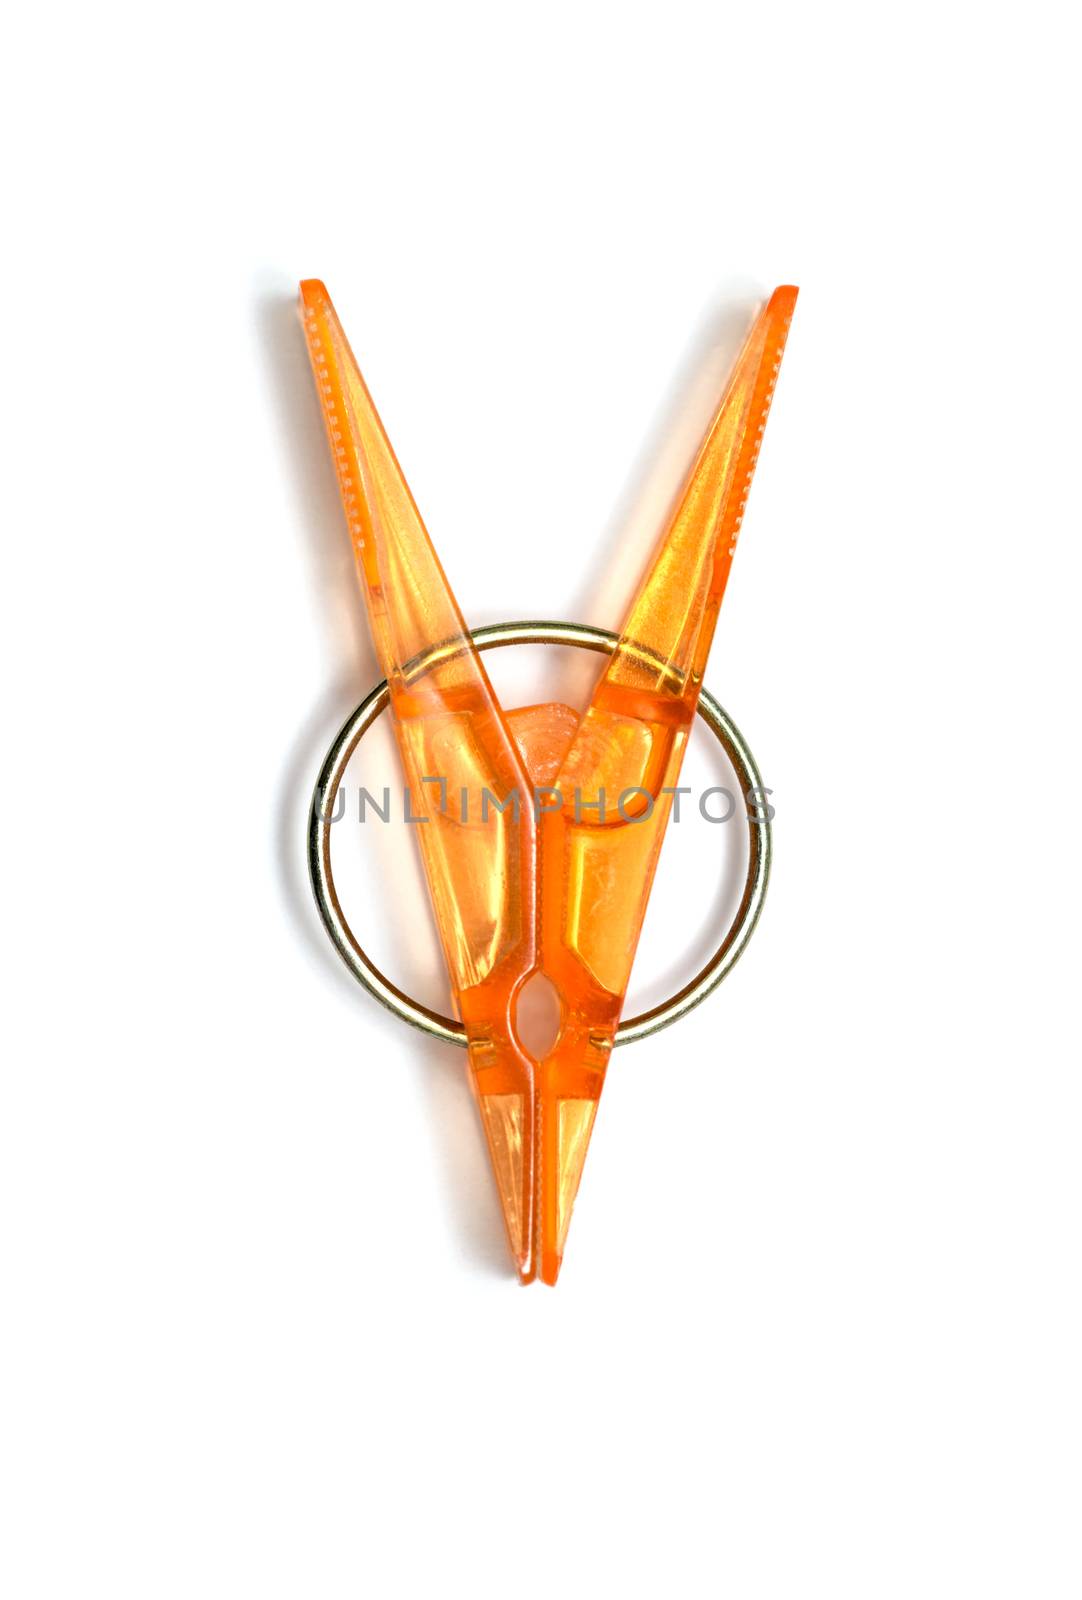 plastic clothespins with metal spring isolated on a white background